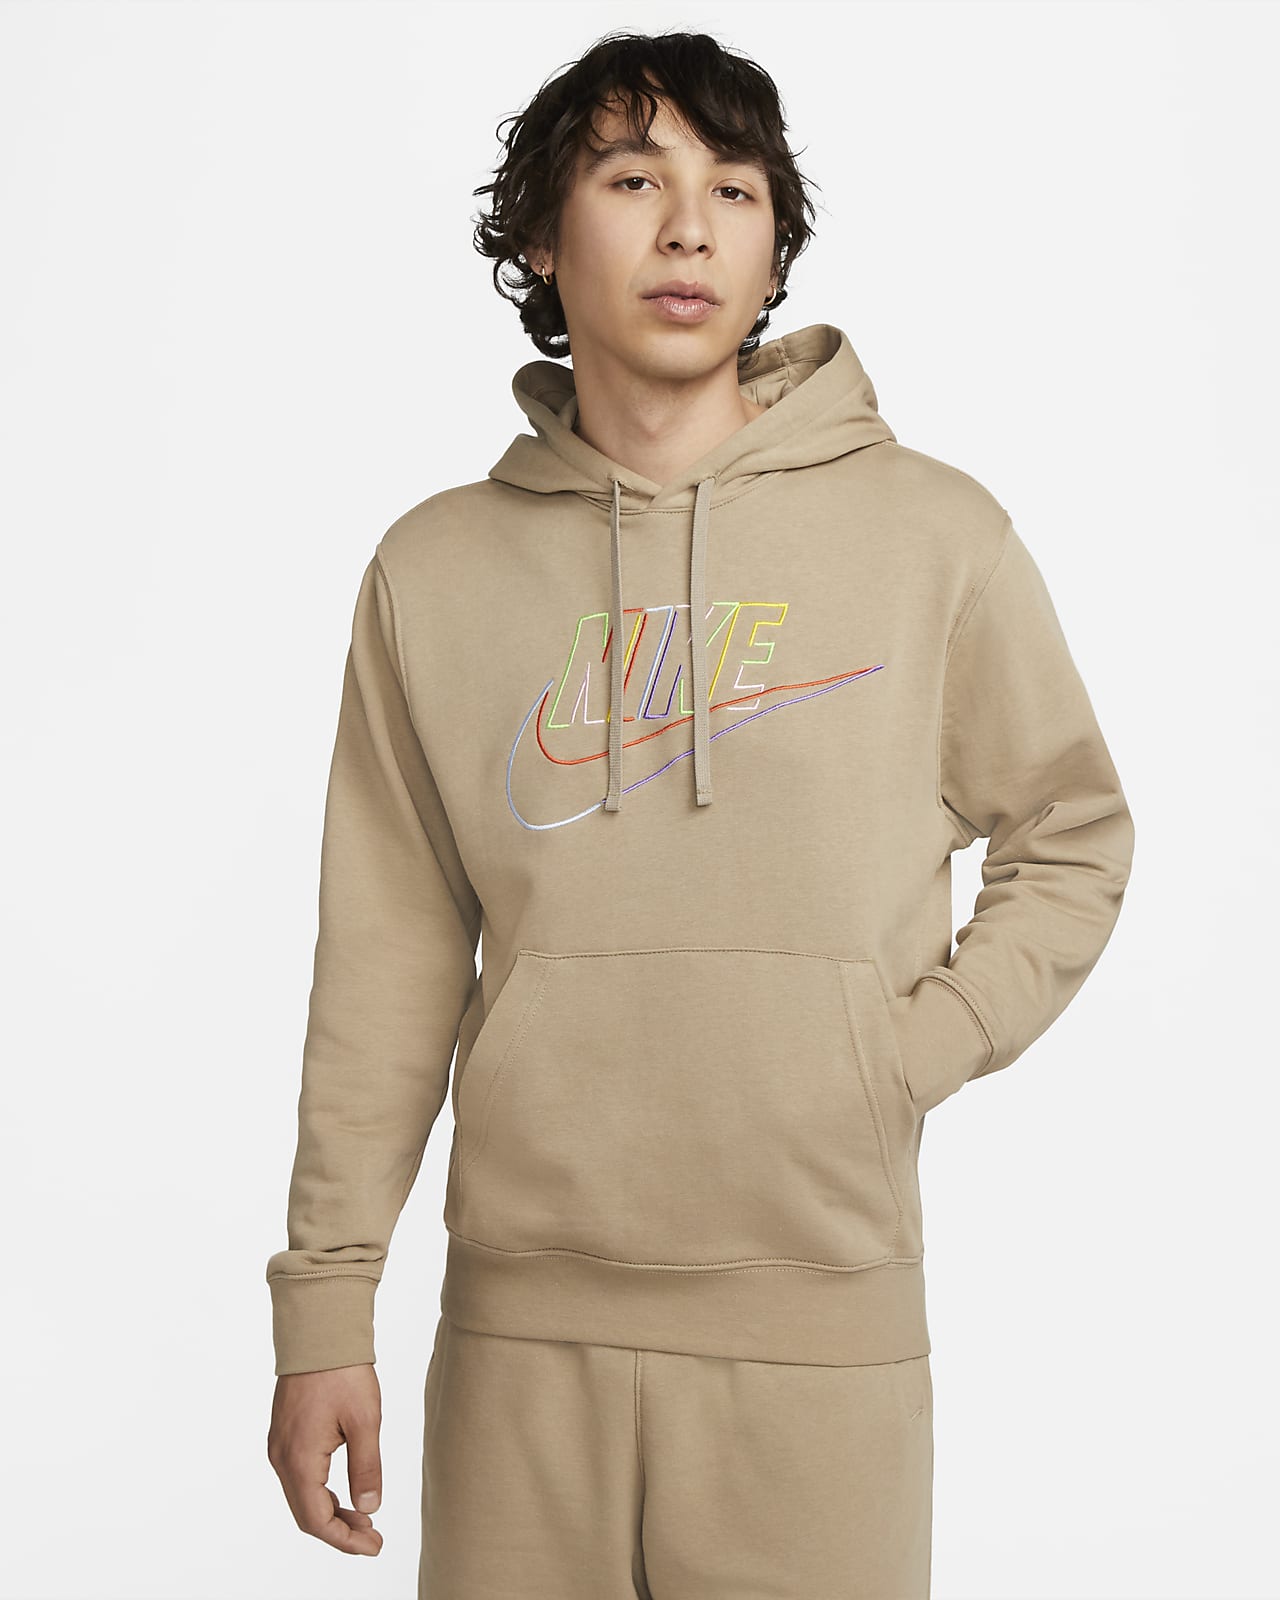 Nike 'Join the Club' Pullover Younger Kids Hoodie. Nike LU